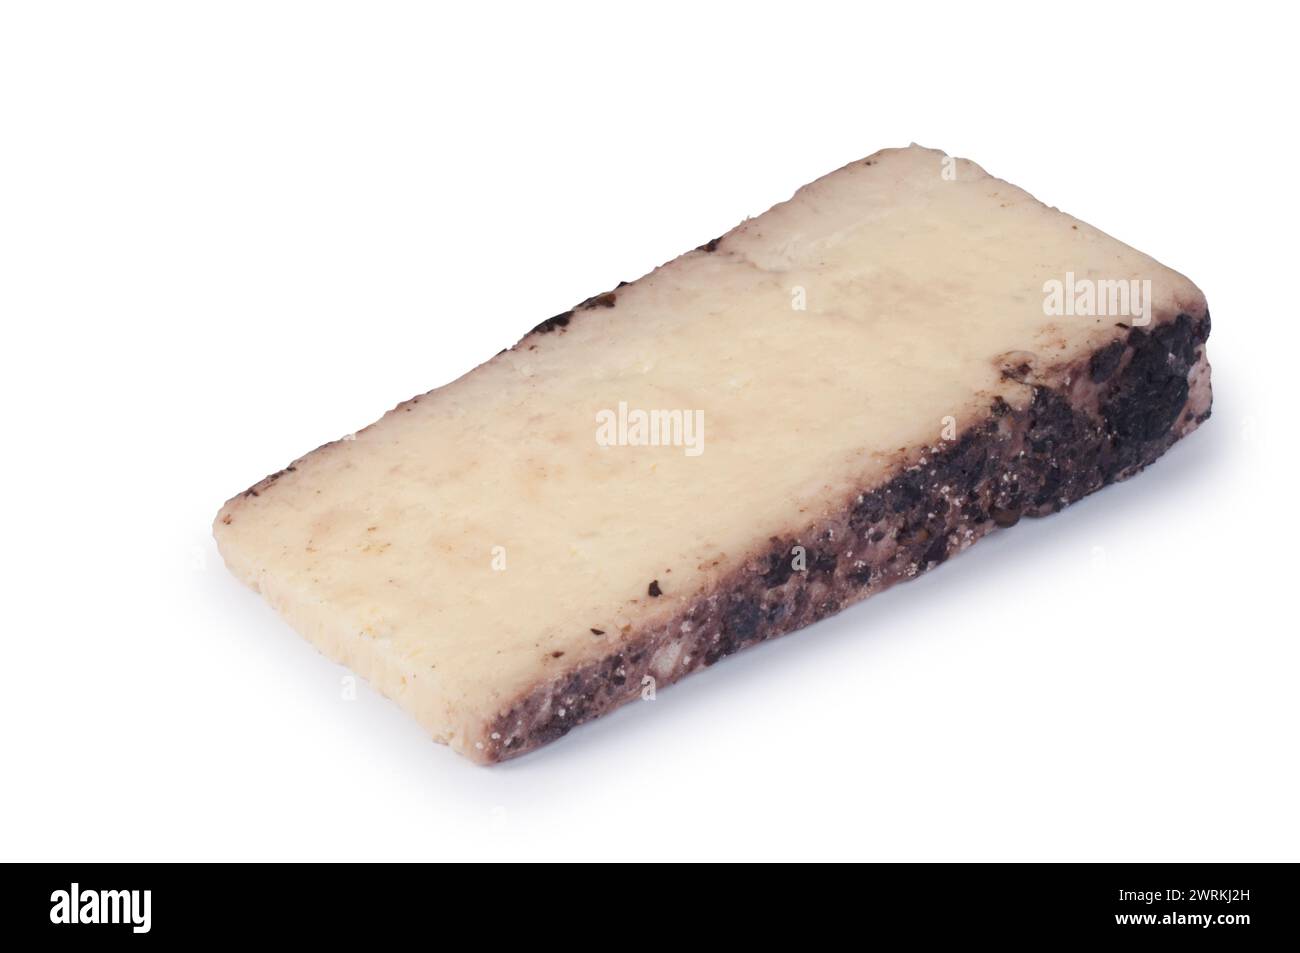 Studio shot of carolina occelli cheese cut out against a white background - John Gollop Stock Photo